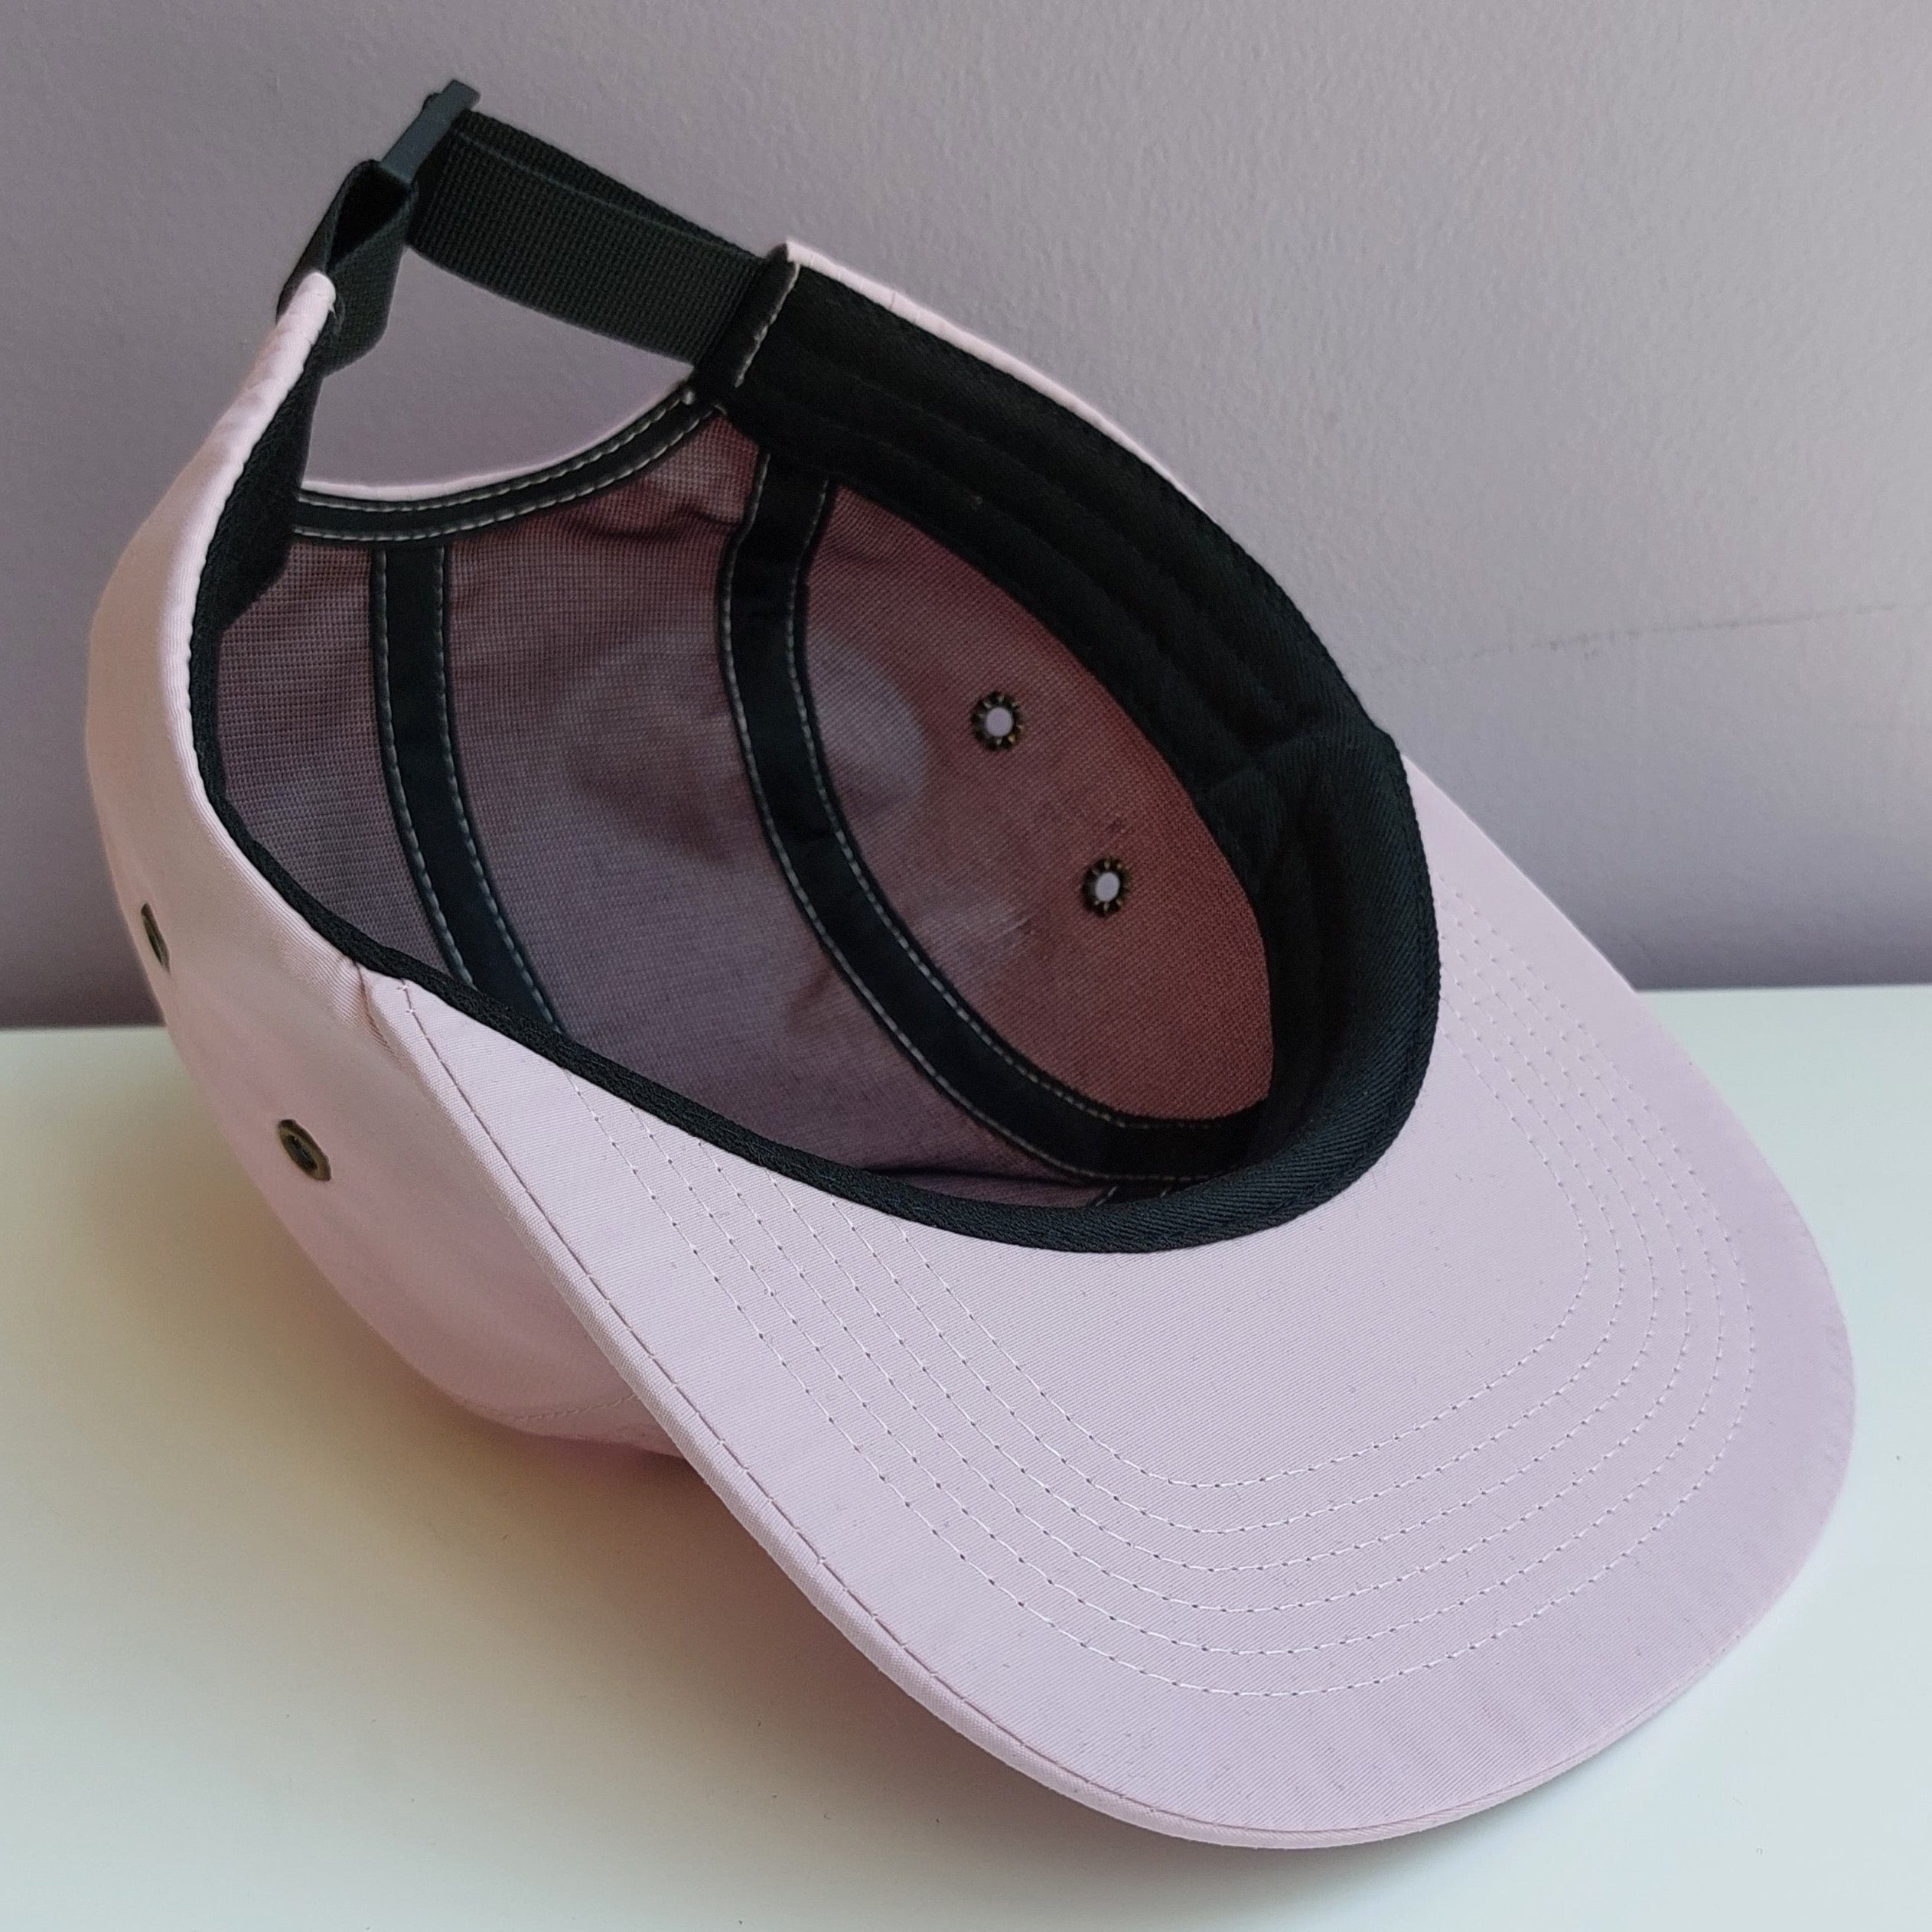 A pale pink 5 panel cap with black mesh interior is upside down & turned at a 45 degree angle sitting on a white surface with a light purple background.